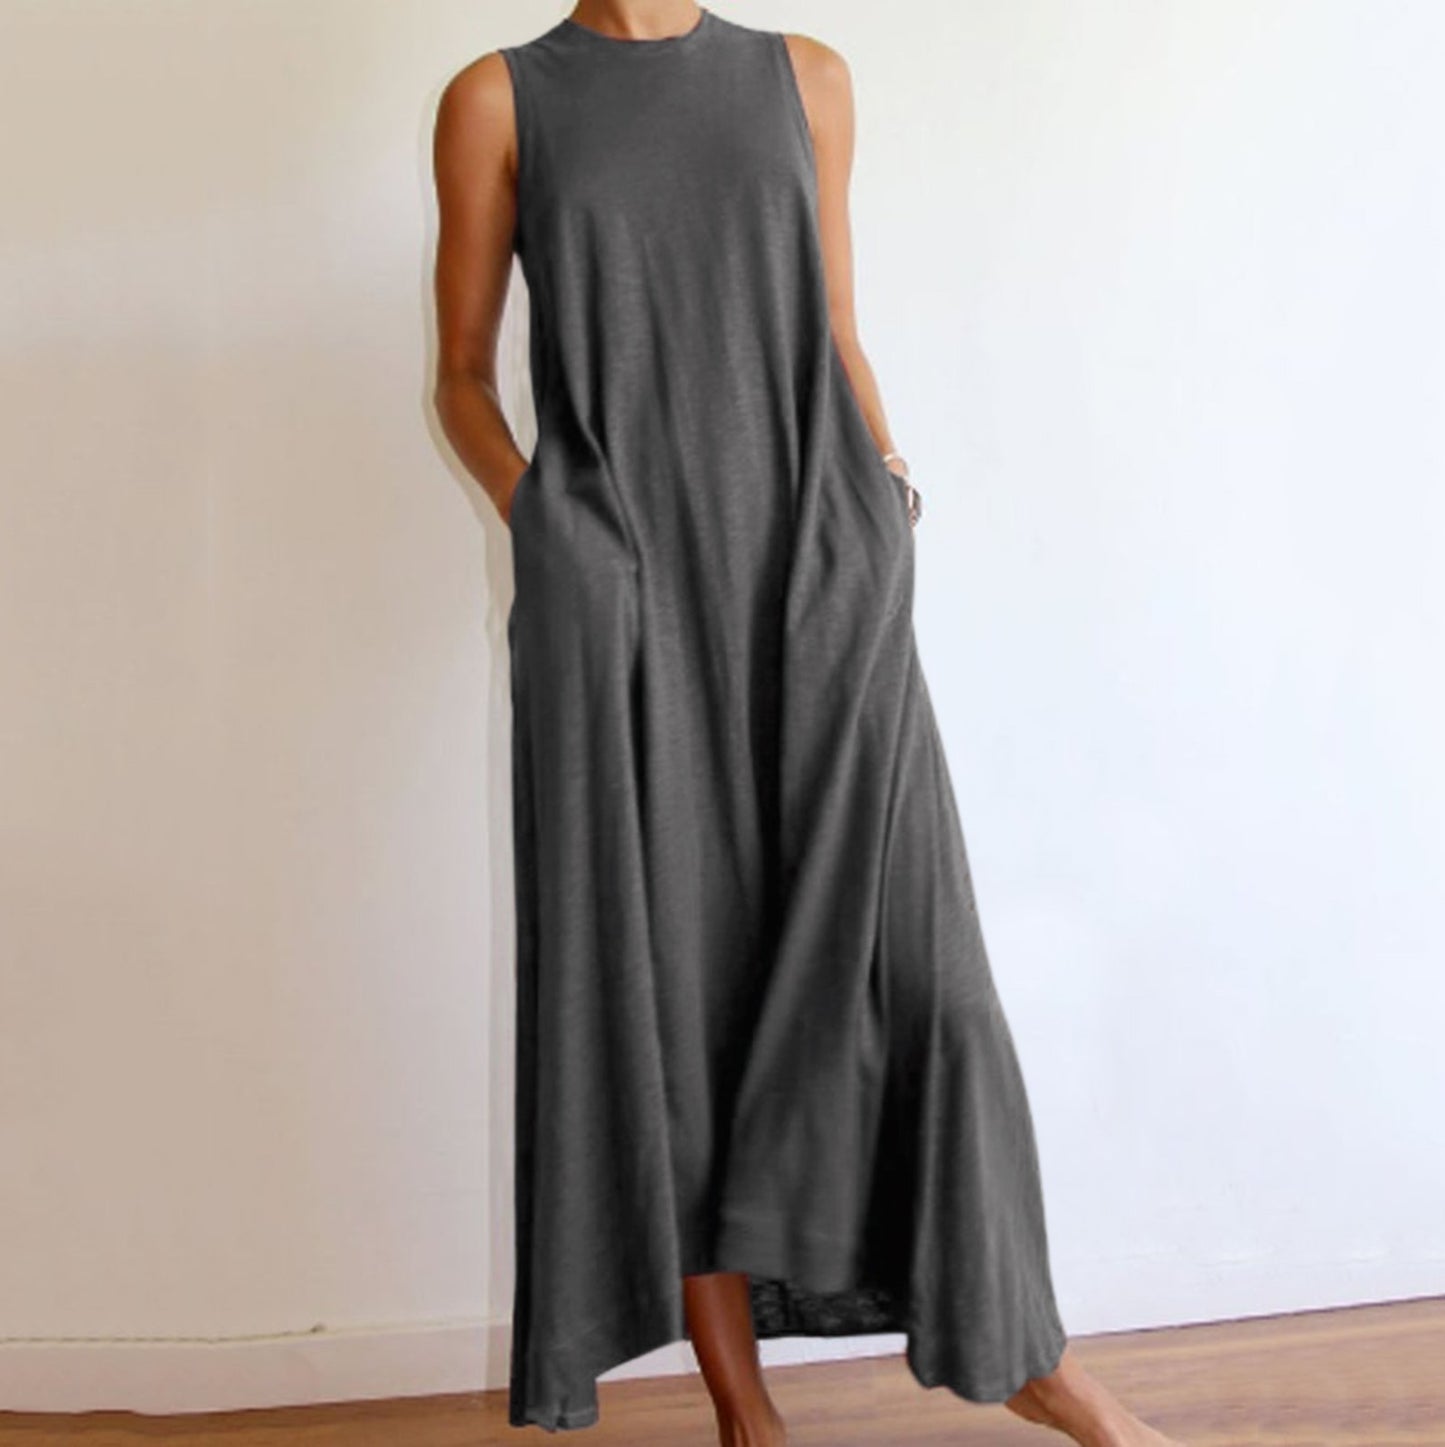 Summer Fashion Casual Comdy Long Dress Women  Loose Solid Color Sleeveless Pockets Ankle-Length Dresses Daily Wear Dress